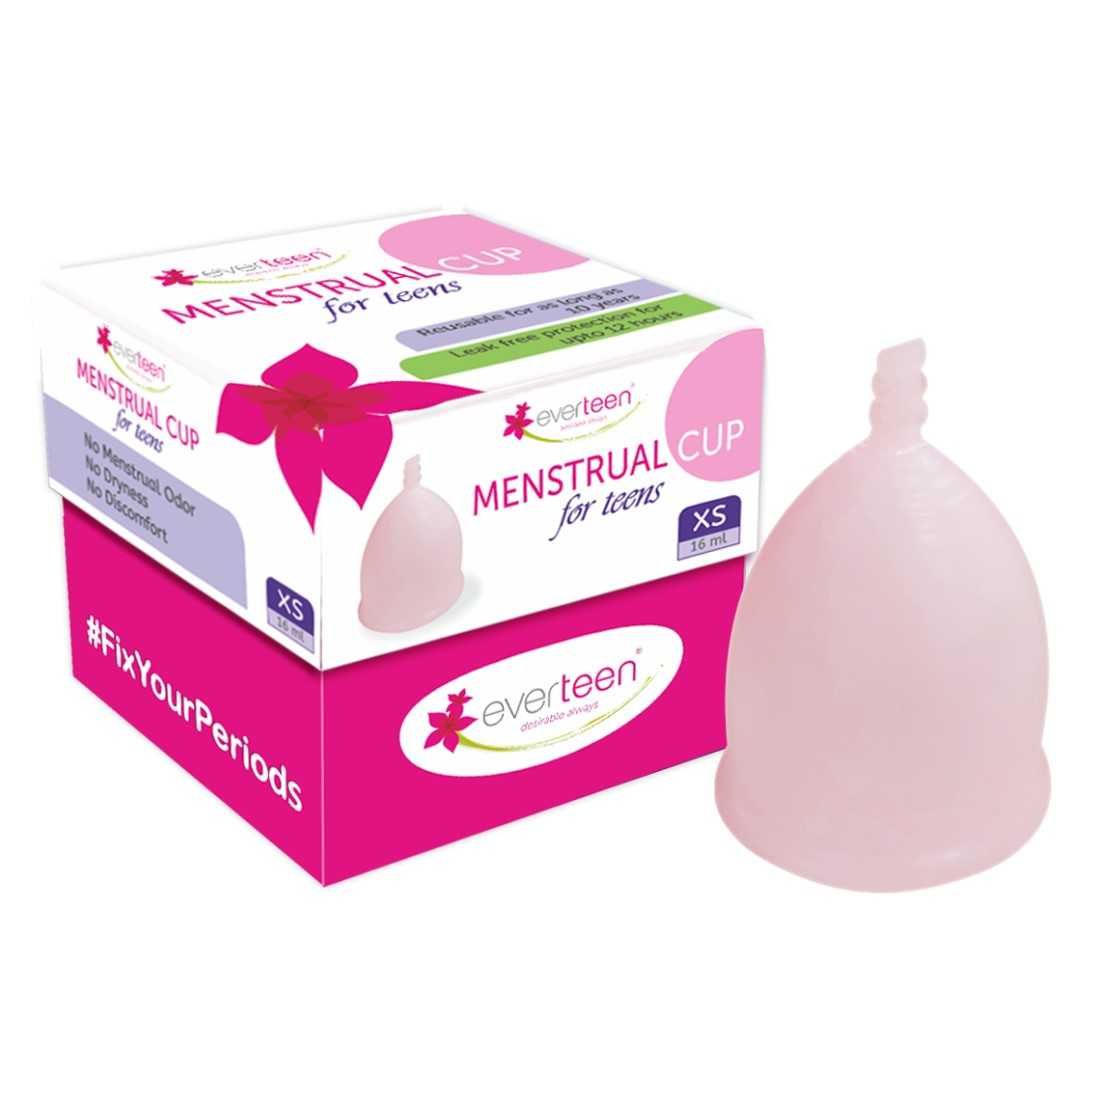 everteen XS Menstrual Cup (Extra Small) for Periods in Teenage Girls - 1 Pack (16ml Capacity)